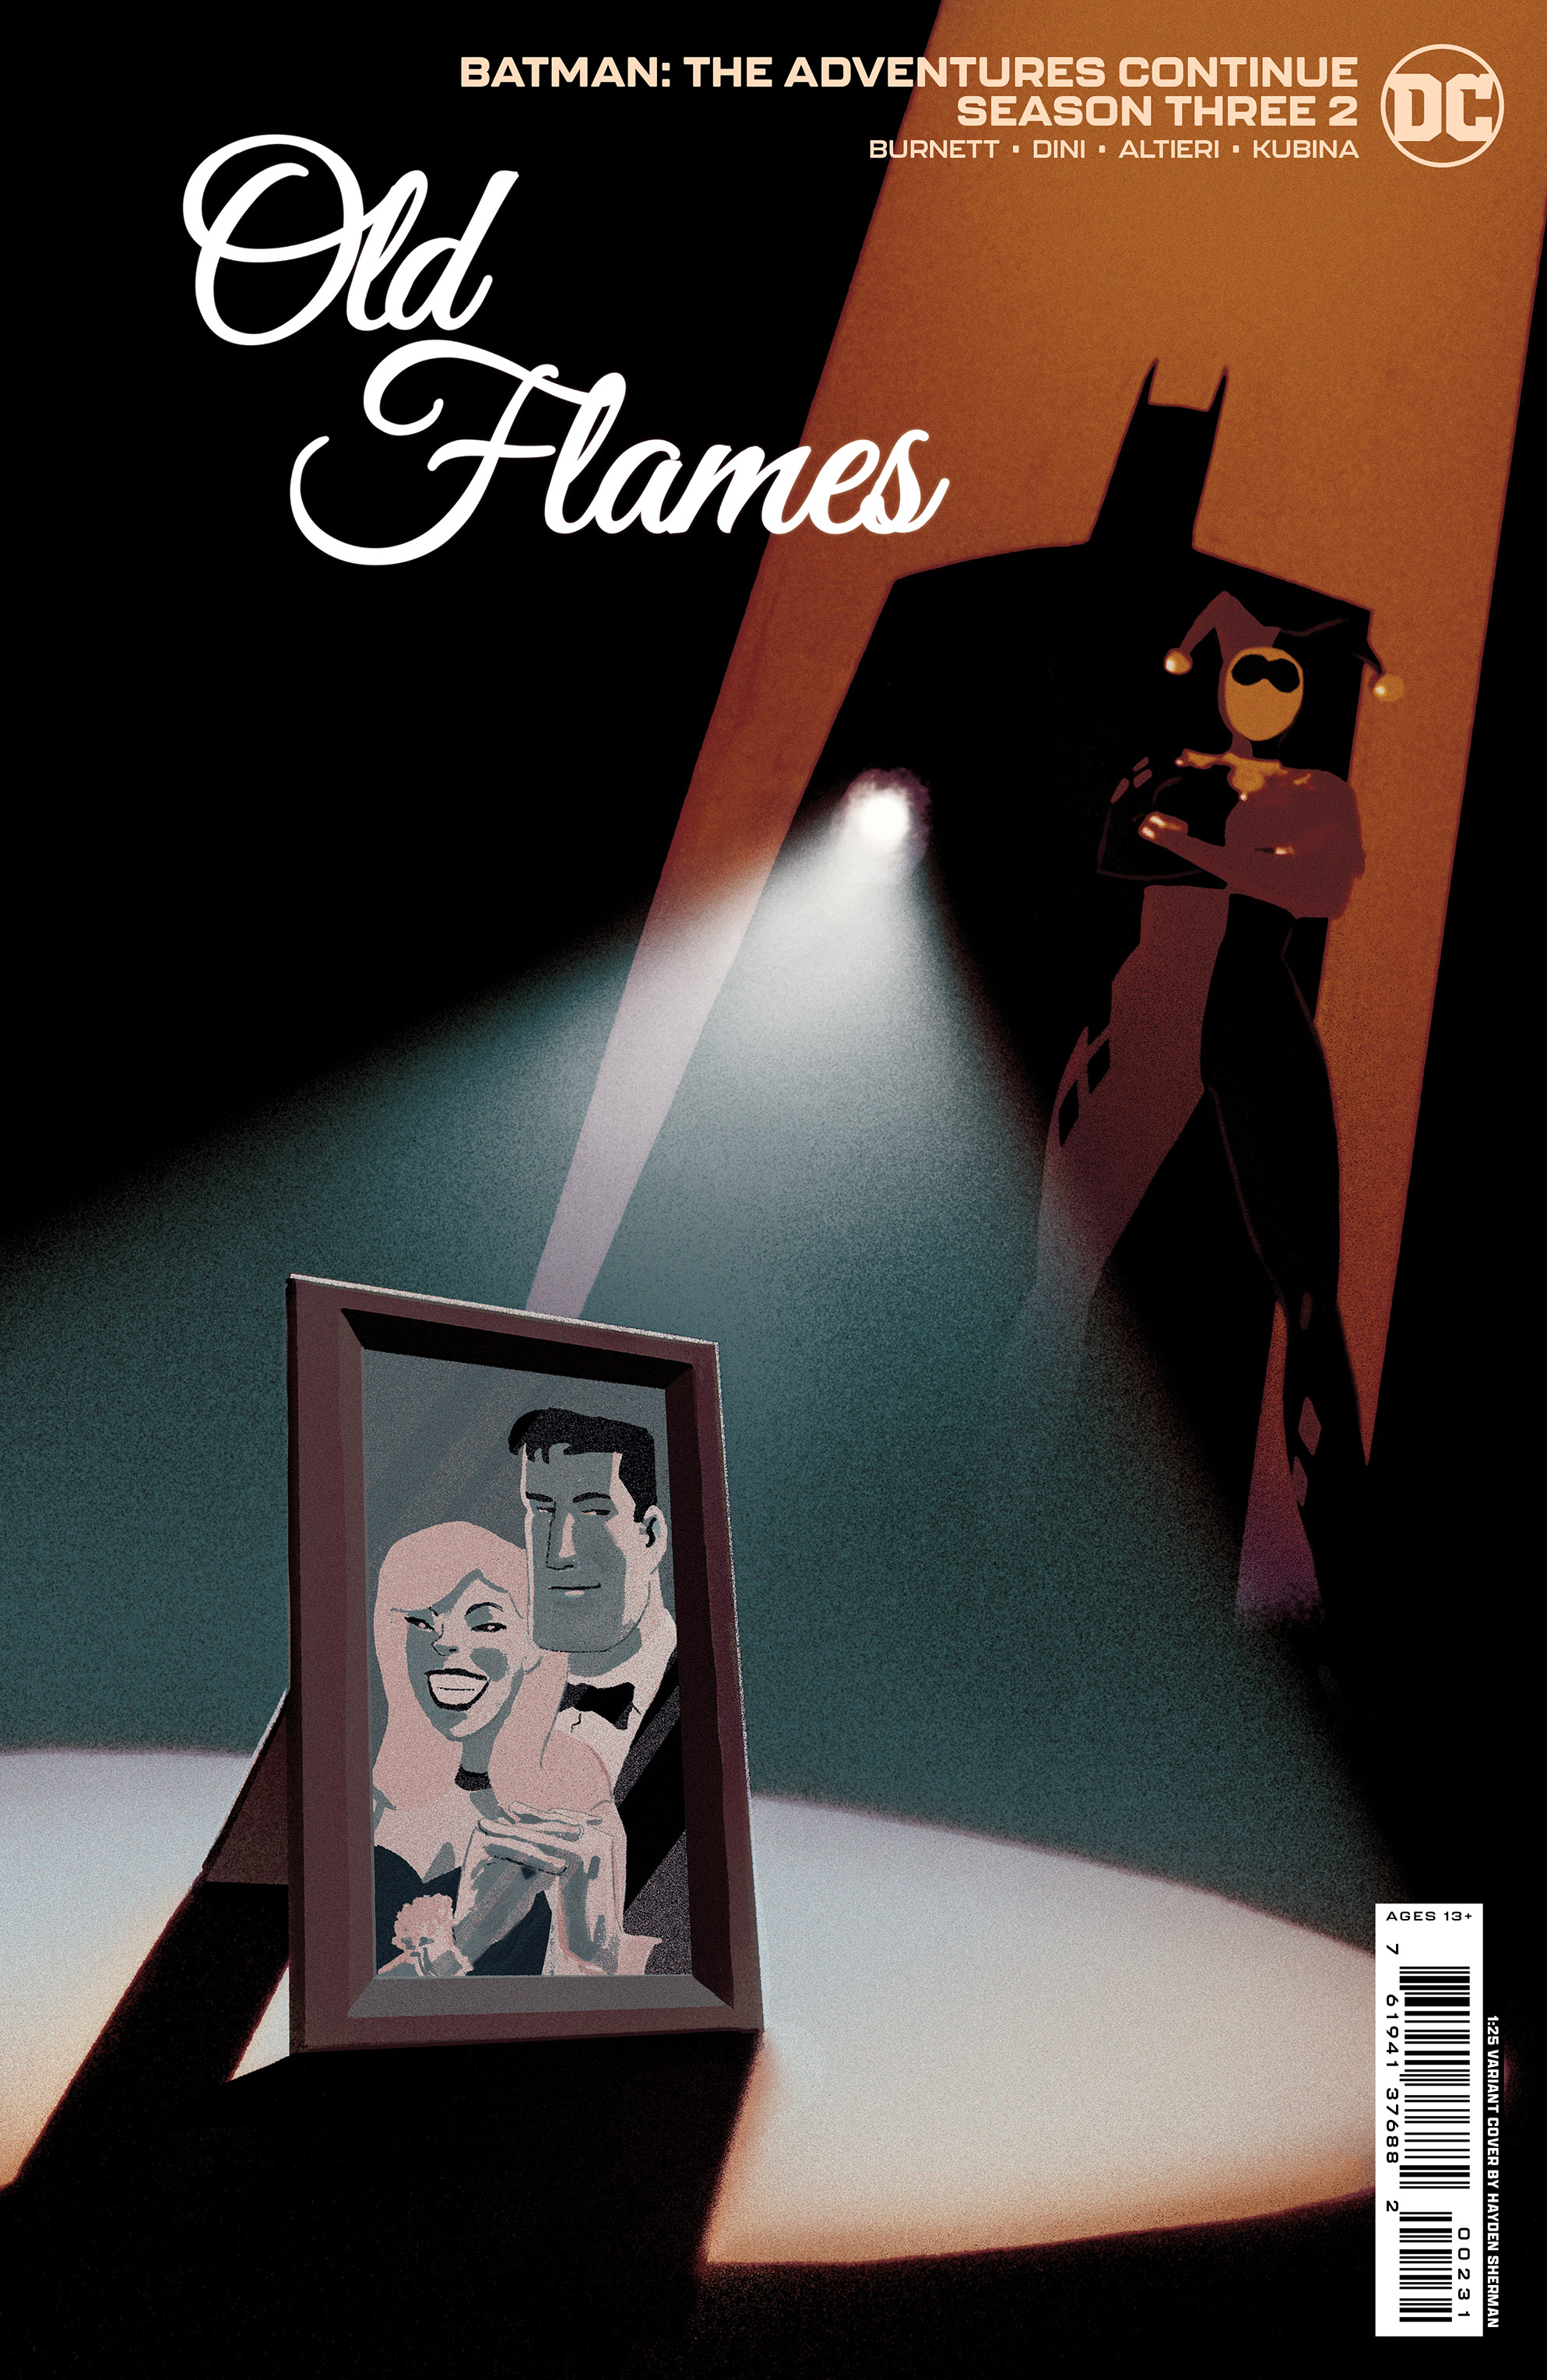 Batman The Adventures Continue Season Three #2 Cover D 1 for 25 Incentive Hayden Sherman Card Stock Variant (Of 7)